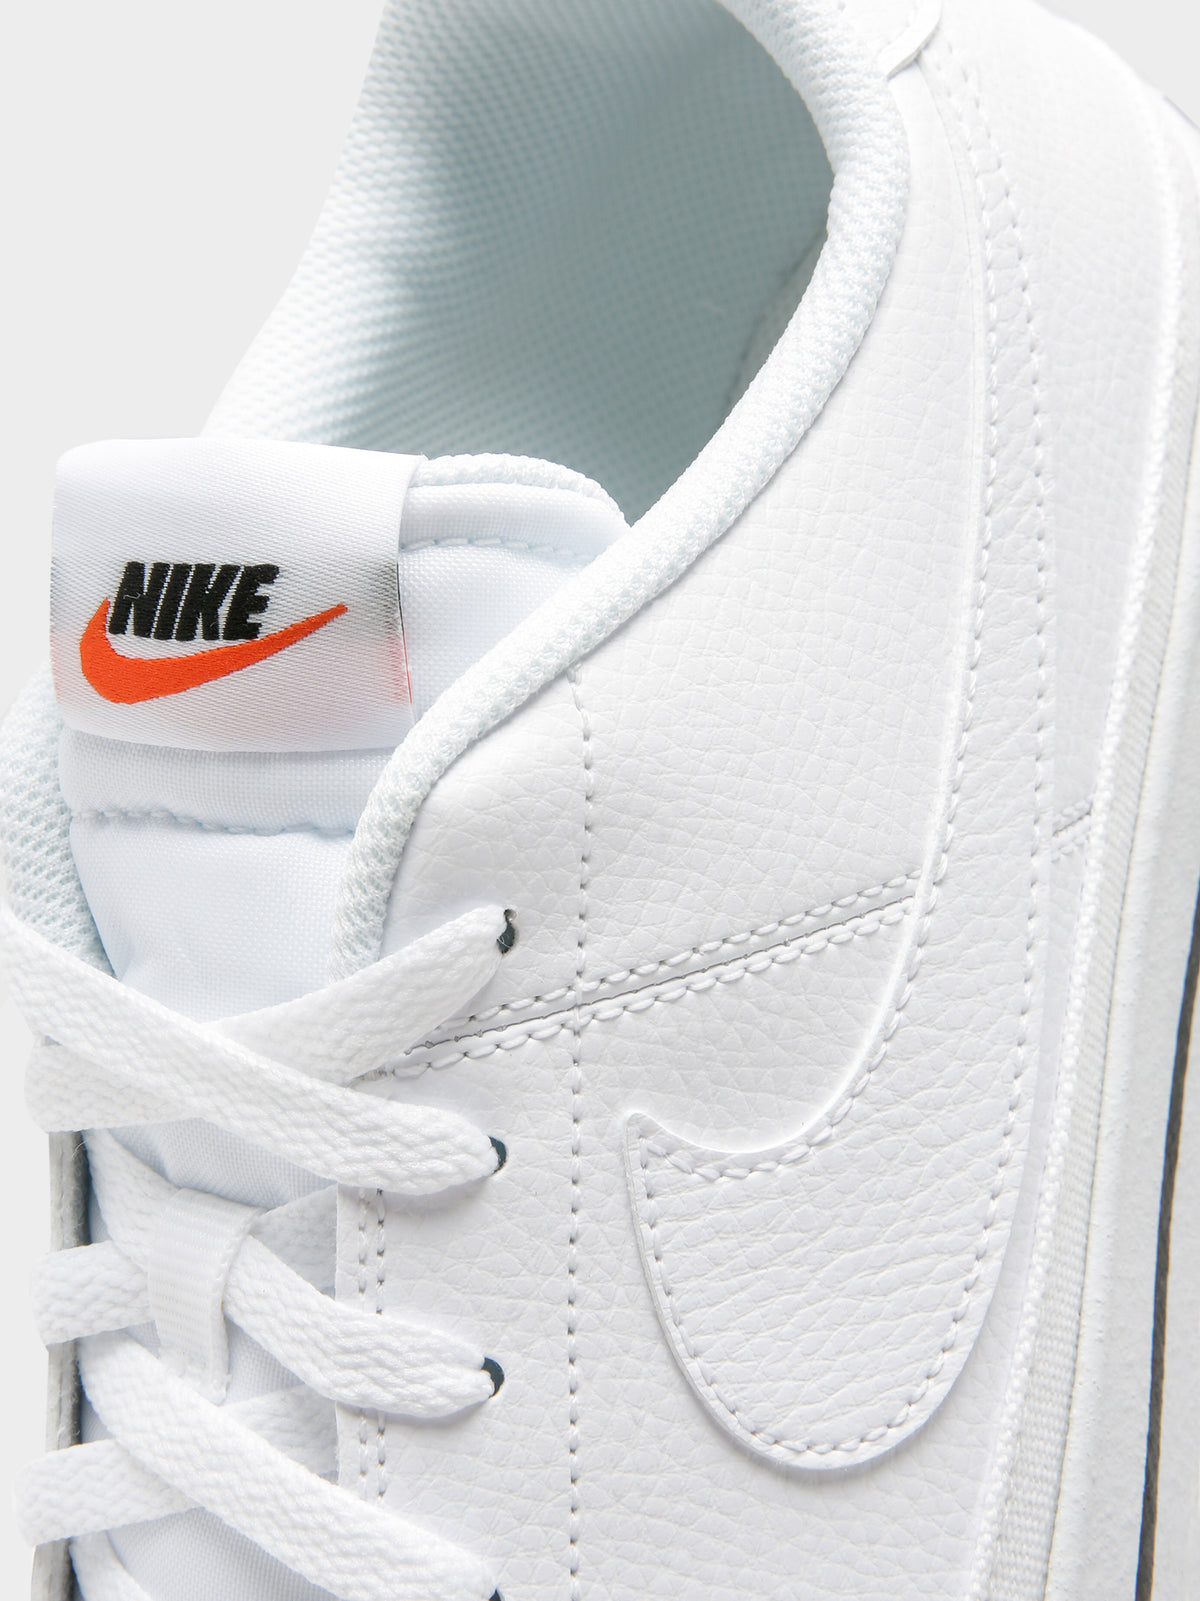 Mens Court Legacy Sneakers in White